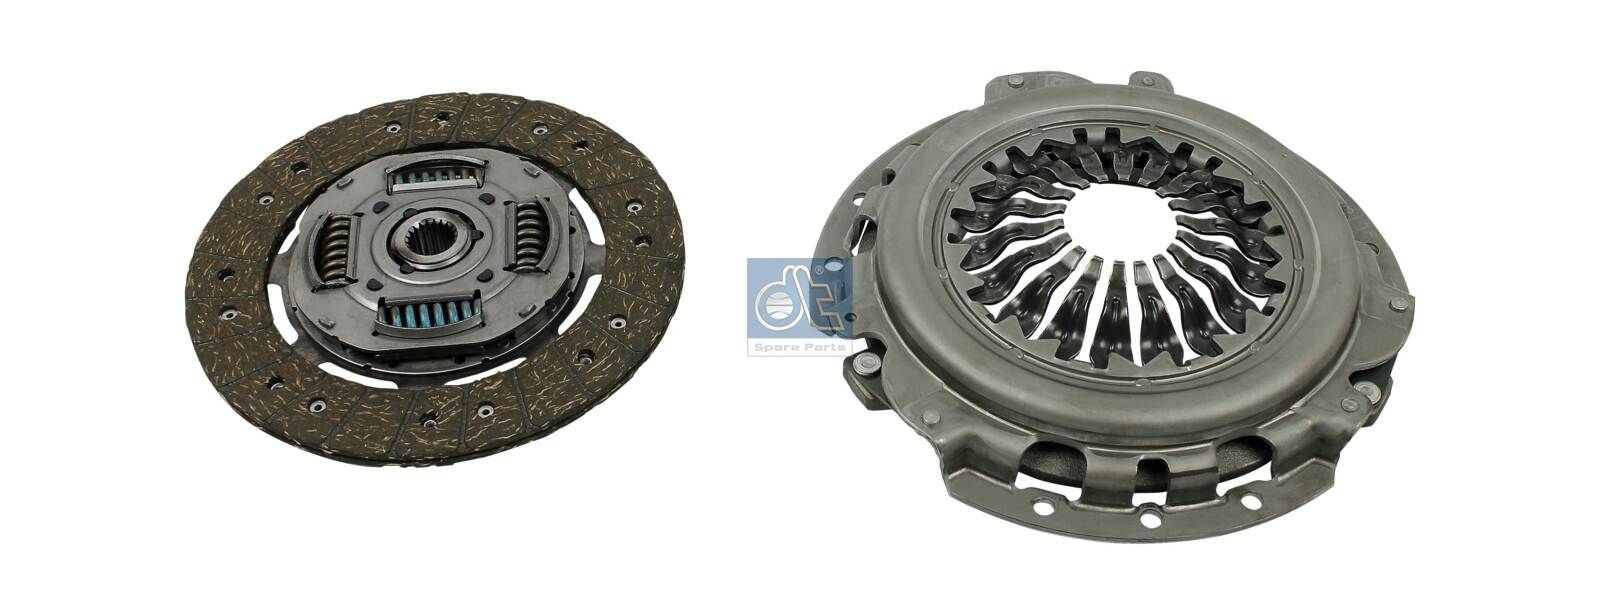 DT Spare Parts 6.93045 Clutch kit RENAULT experience and price